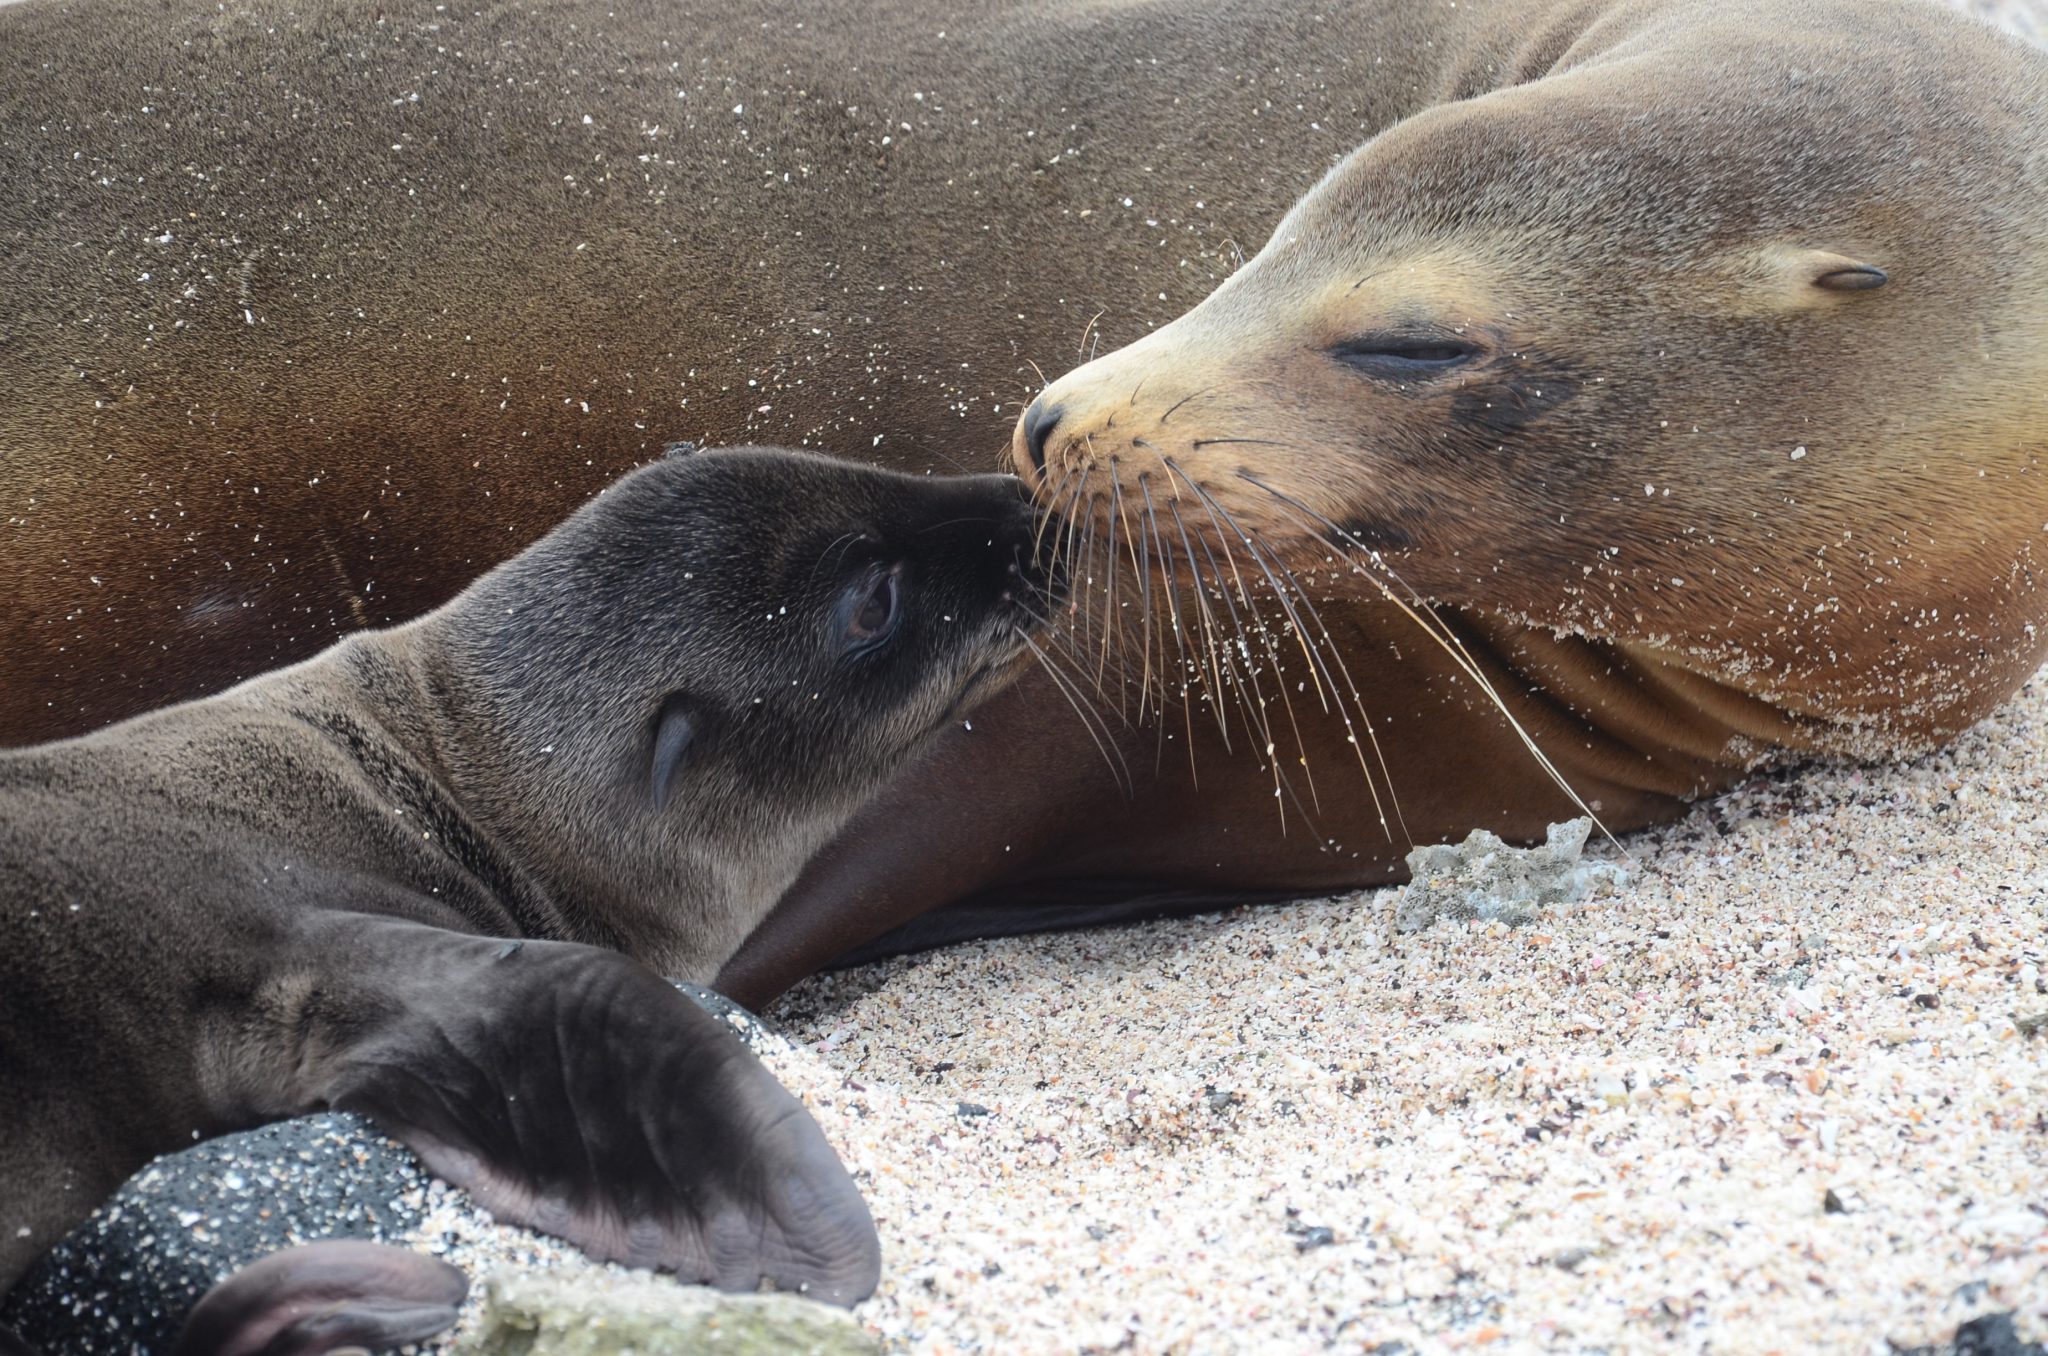 A cute sea lion photo of a mother kissing her pup while they are both lying on a sandy beach